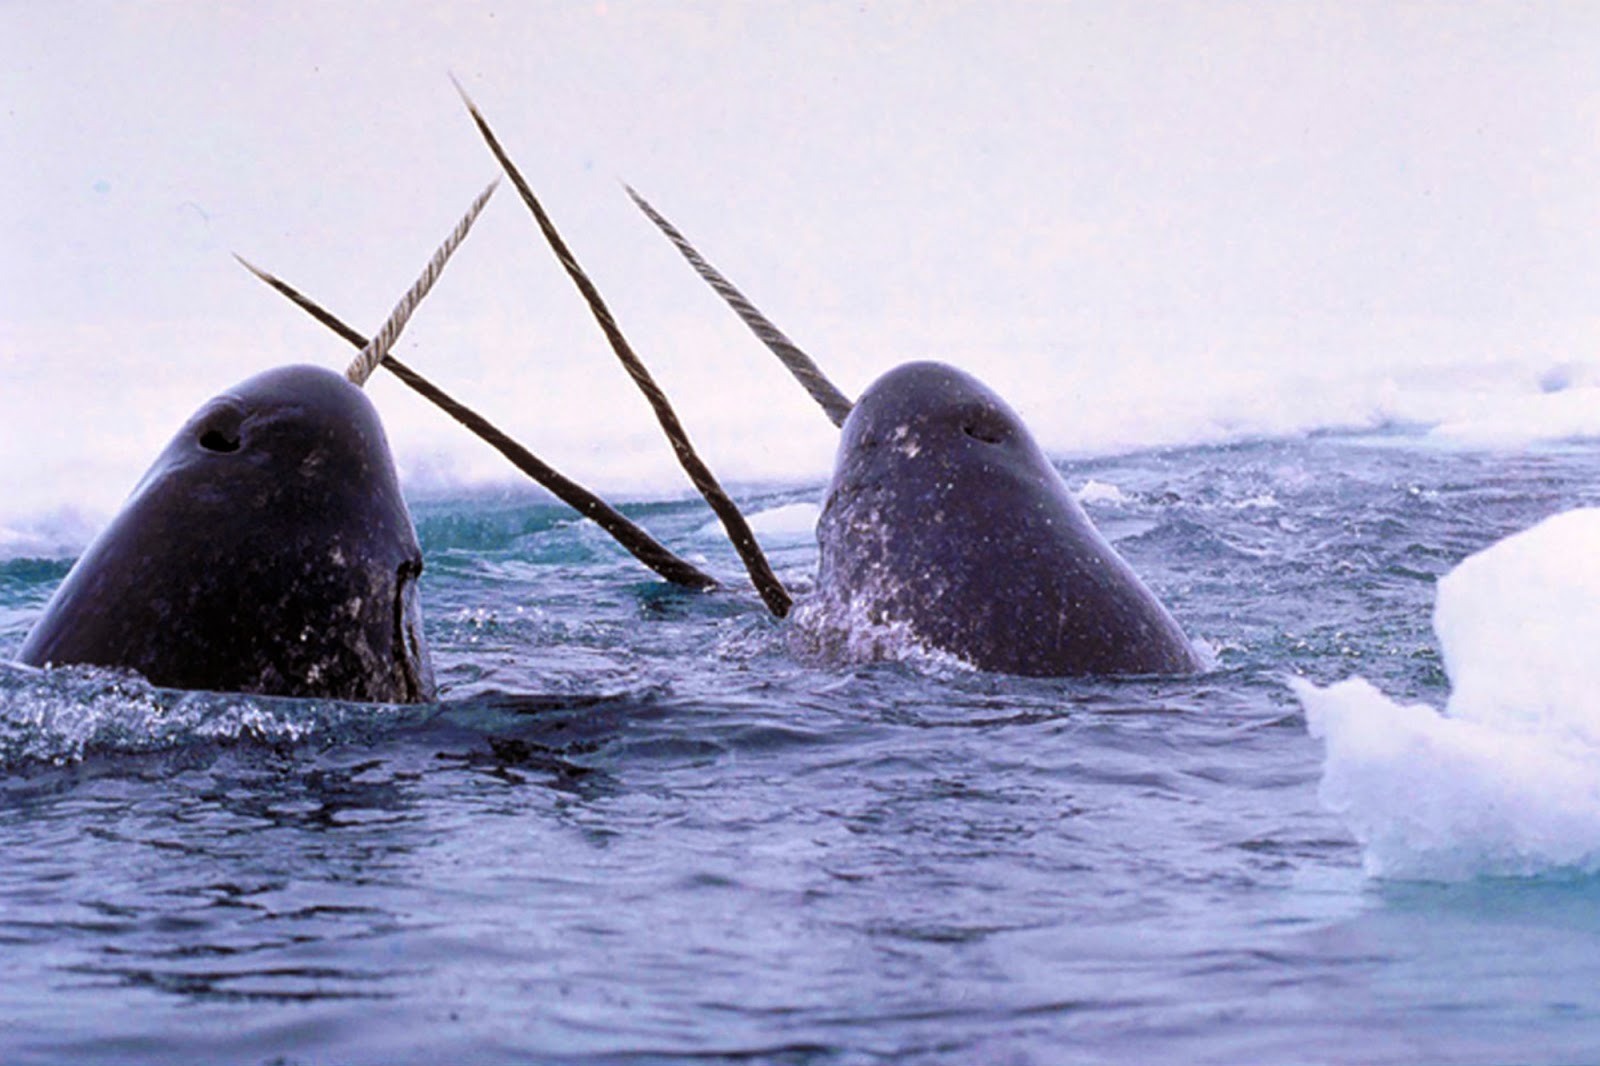 Narwhal Tusks Record Changes in the Marine Arctic